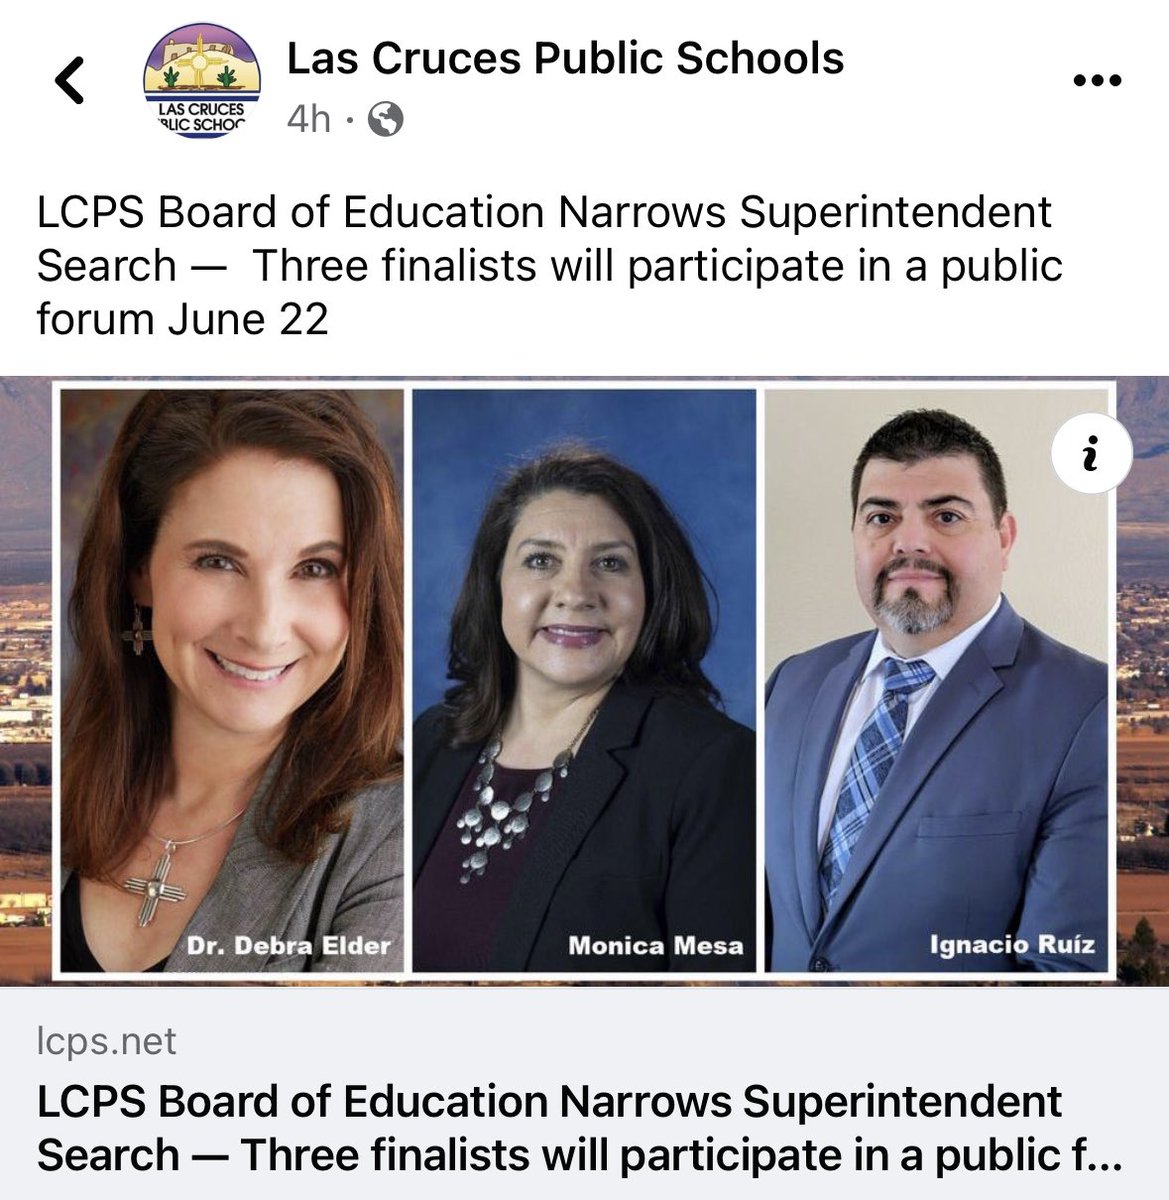 We hope you attend the Superintendent Finalists public forum this Thursday, June 22 at 5:30PM at the OMHS Performing Arts Center! 
Link here: lcps.net/o/lcps/article…